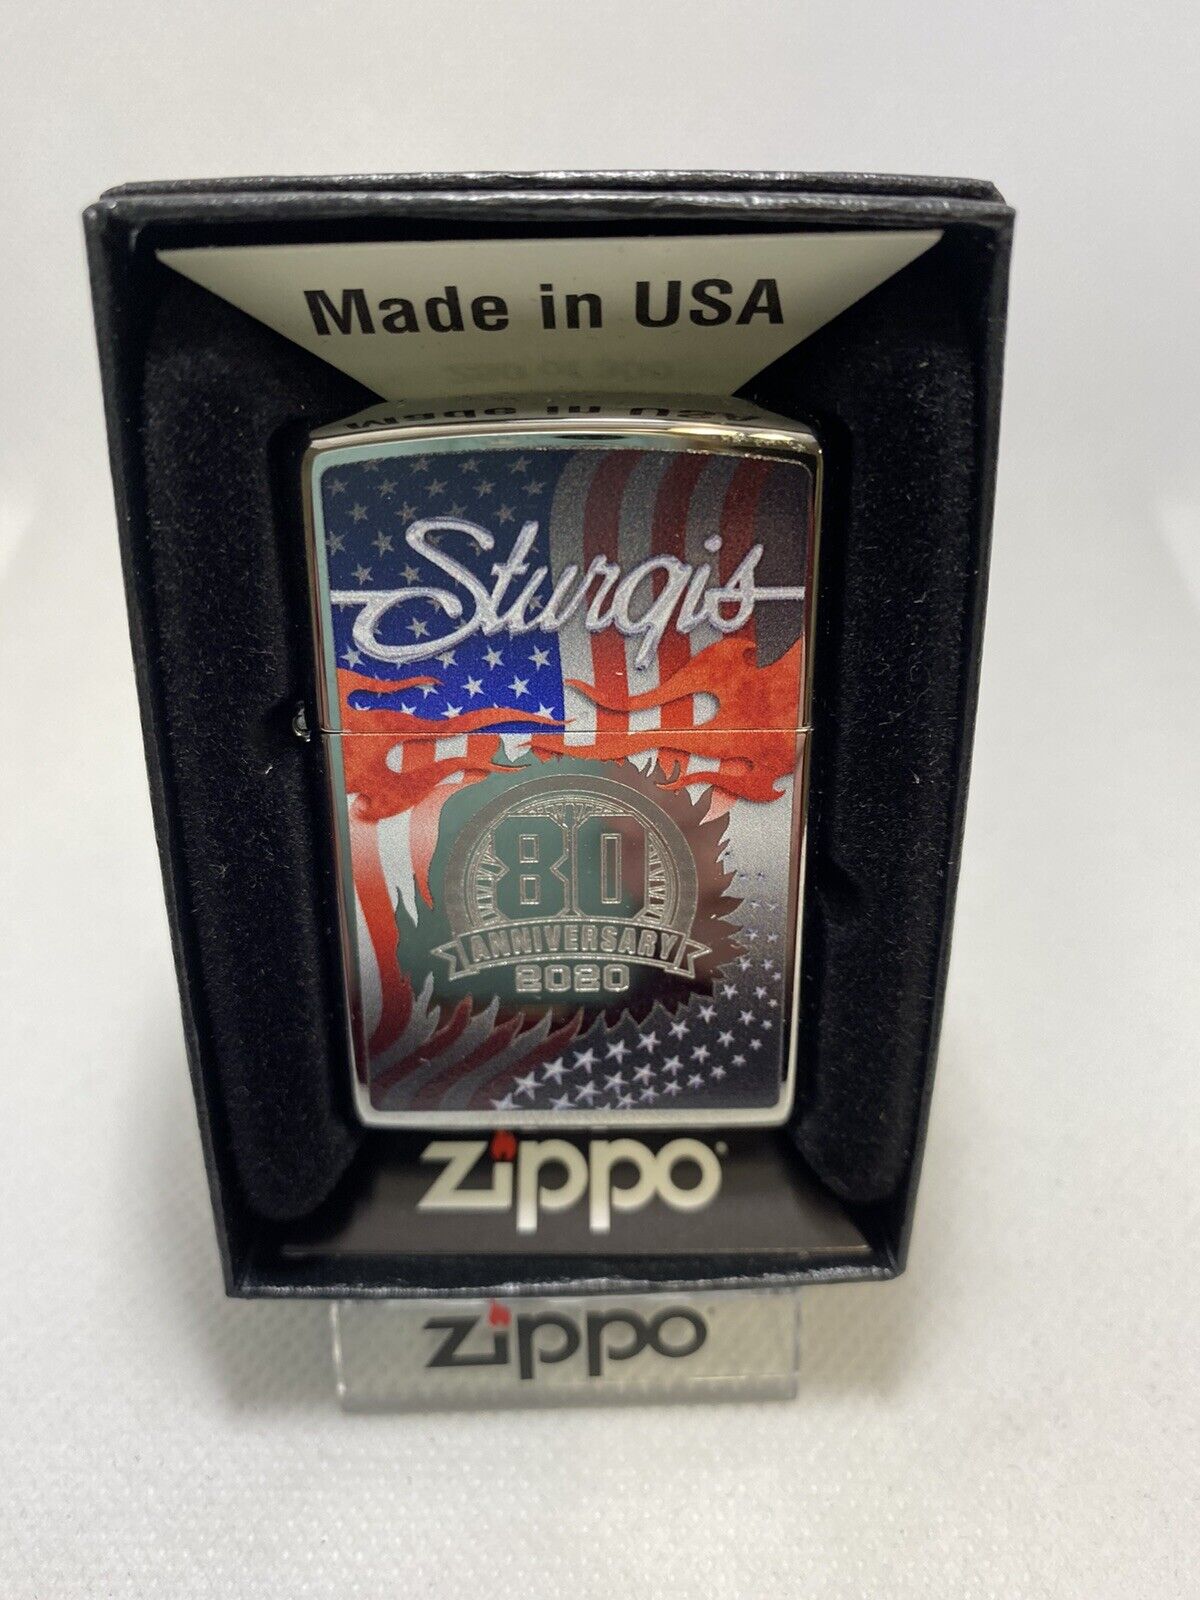 Zippo Registered Limited Edition Numbered 218/300 80th Anniv Sturgis Lighter